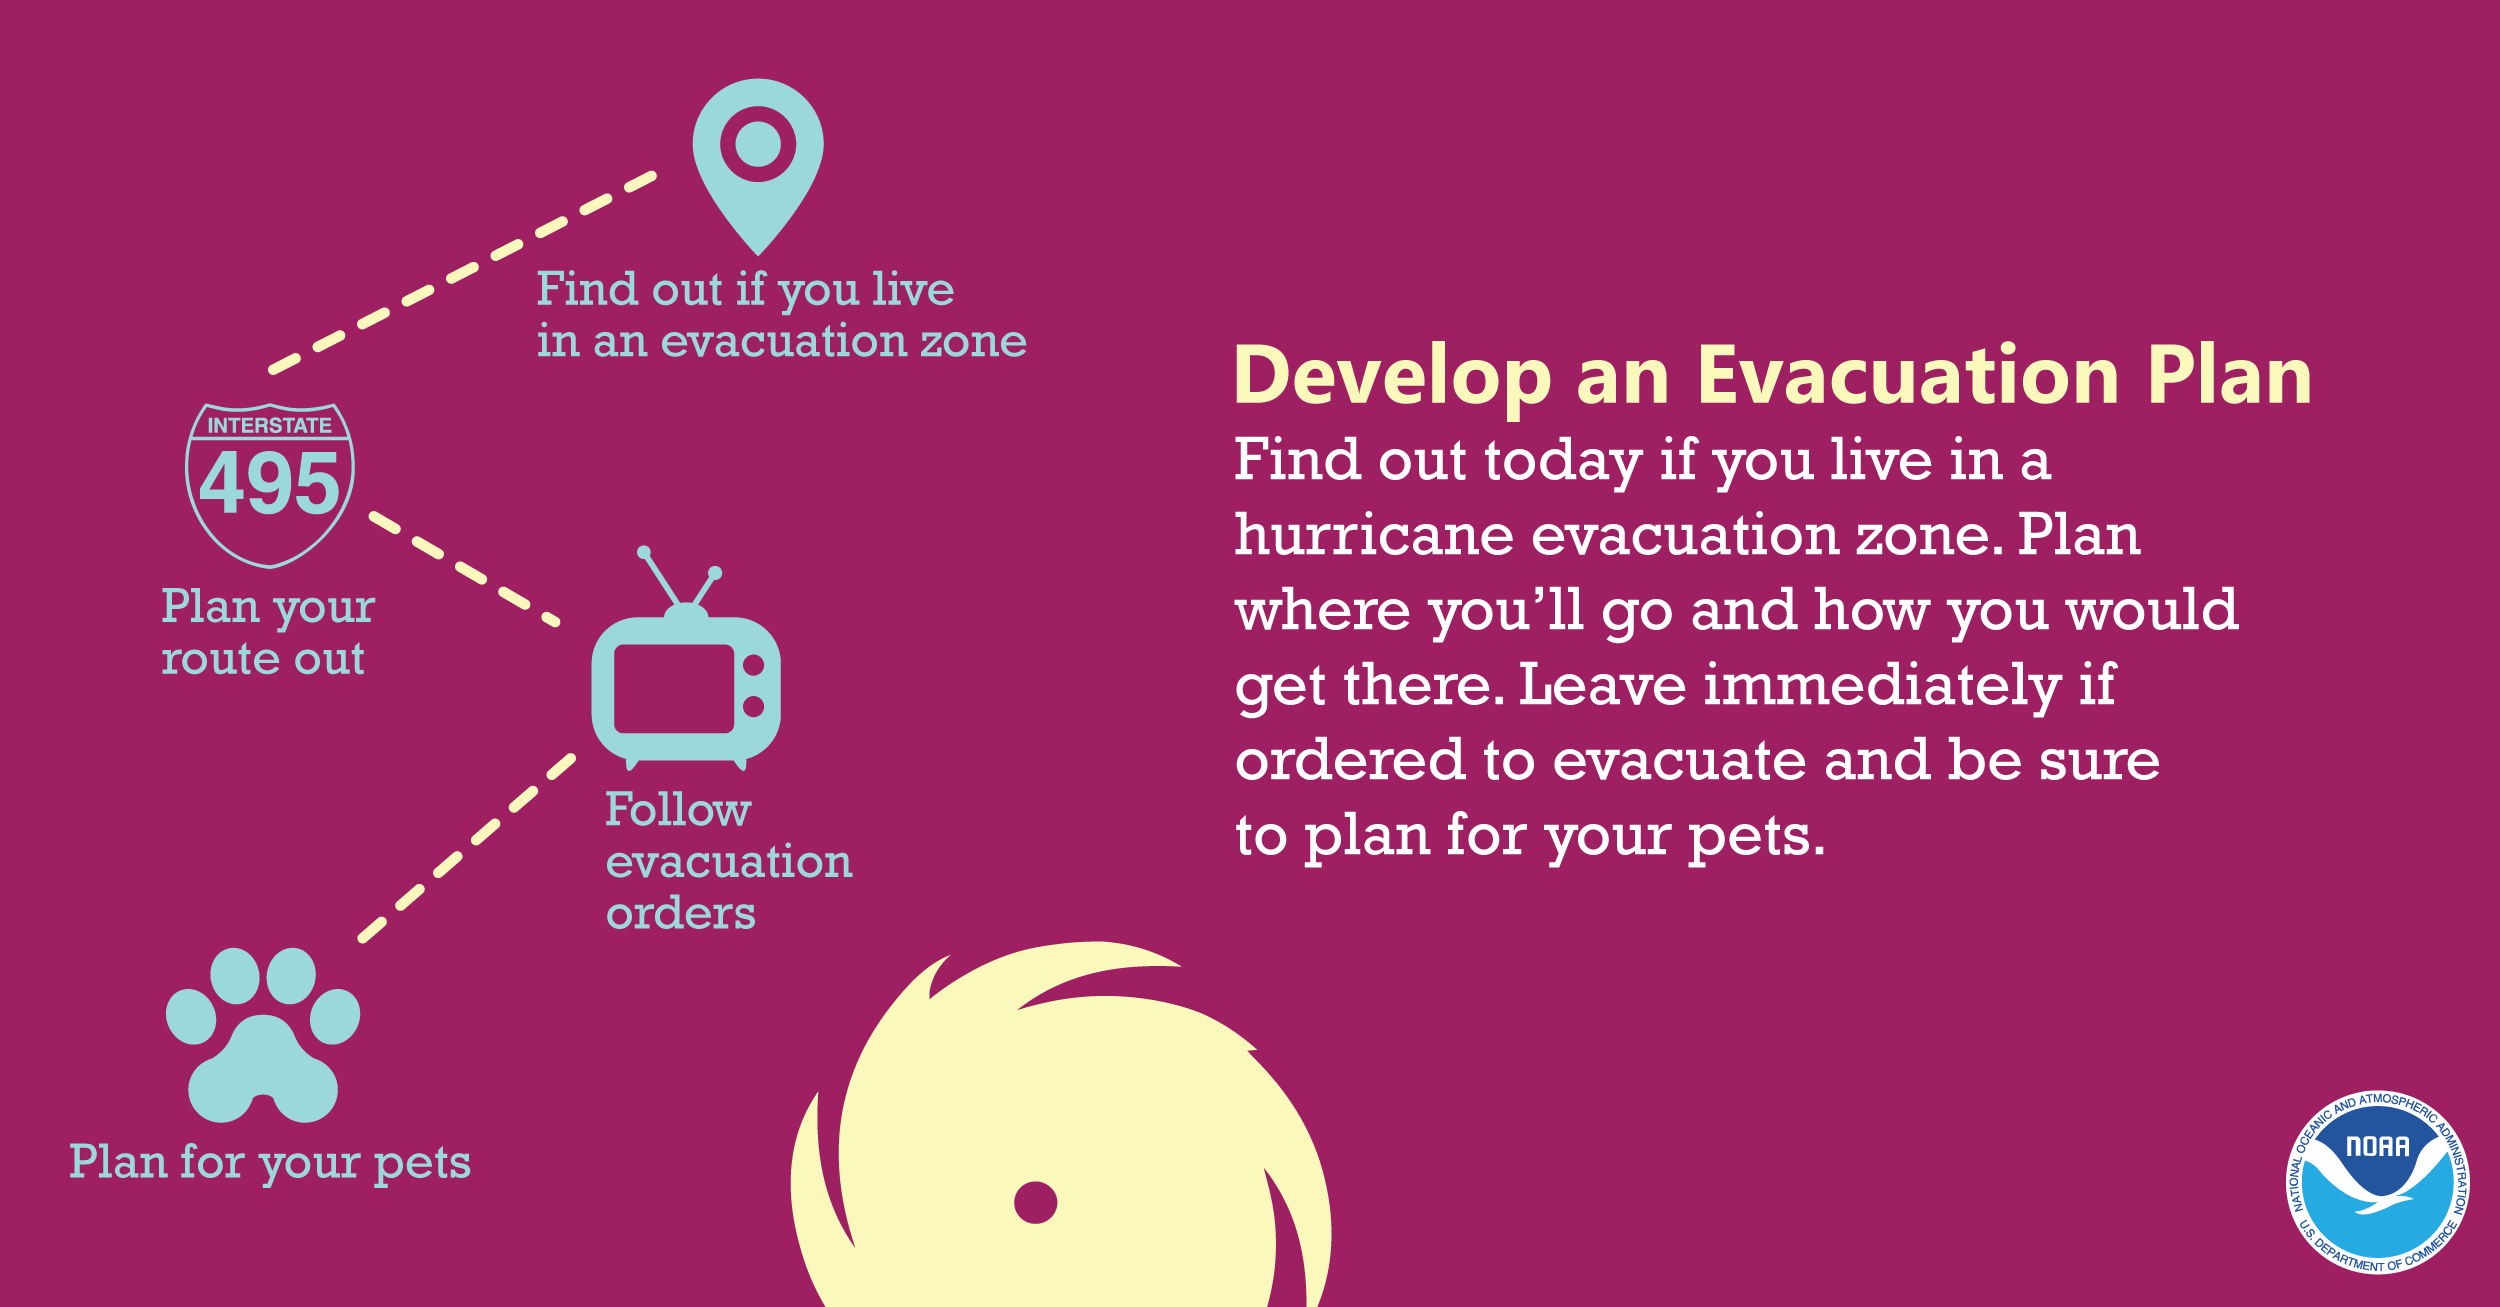 Develop an Evacuation Plan: Find out today if you live in a hurricane evacuation zone. Plan where you'll go and how you would get there. Leave immediately if ordered to evacuate and be sure to plan for your pets.